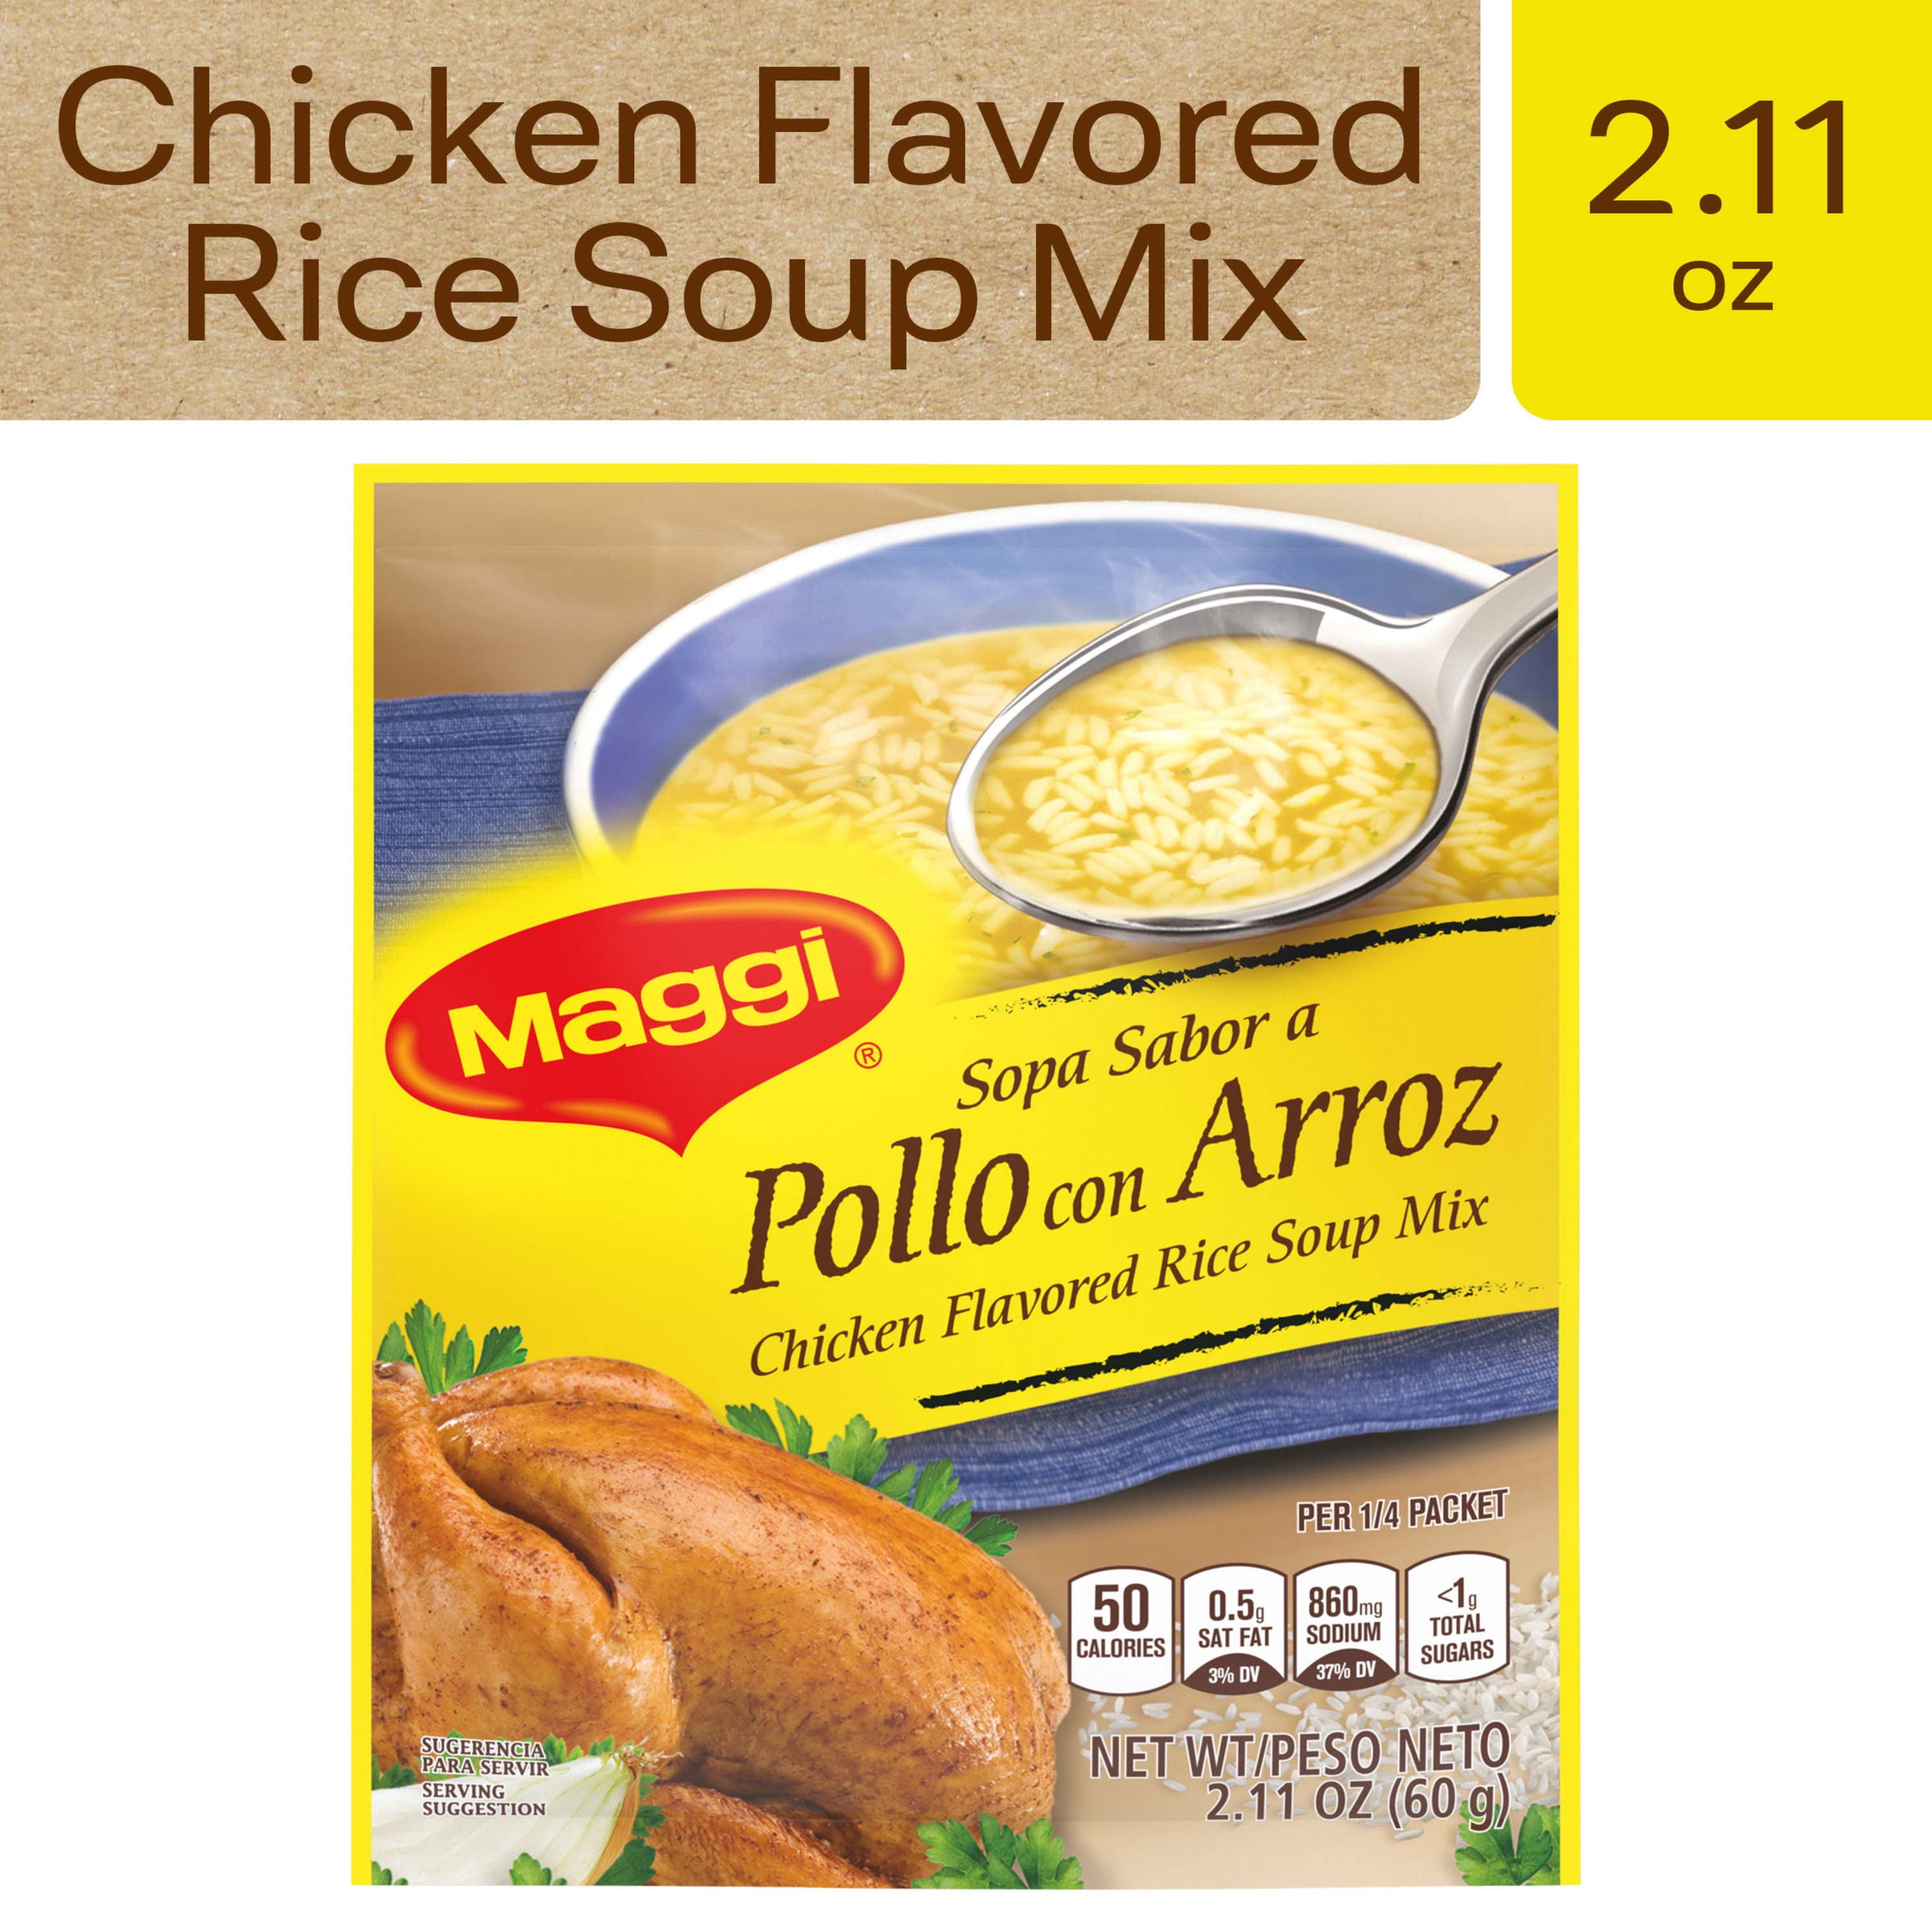 Maggi 50 Calories Chicken Flavored Rice Soup Mix, 2.11 oz